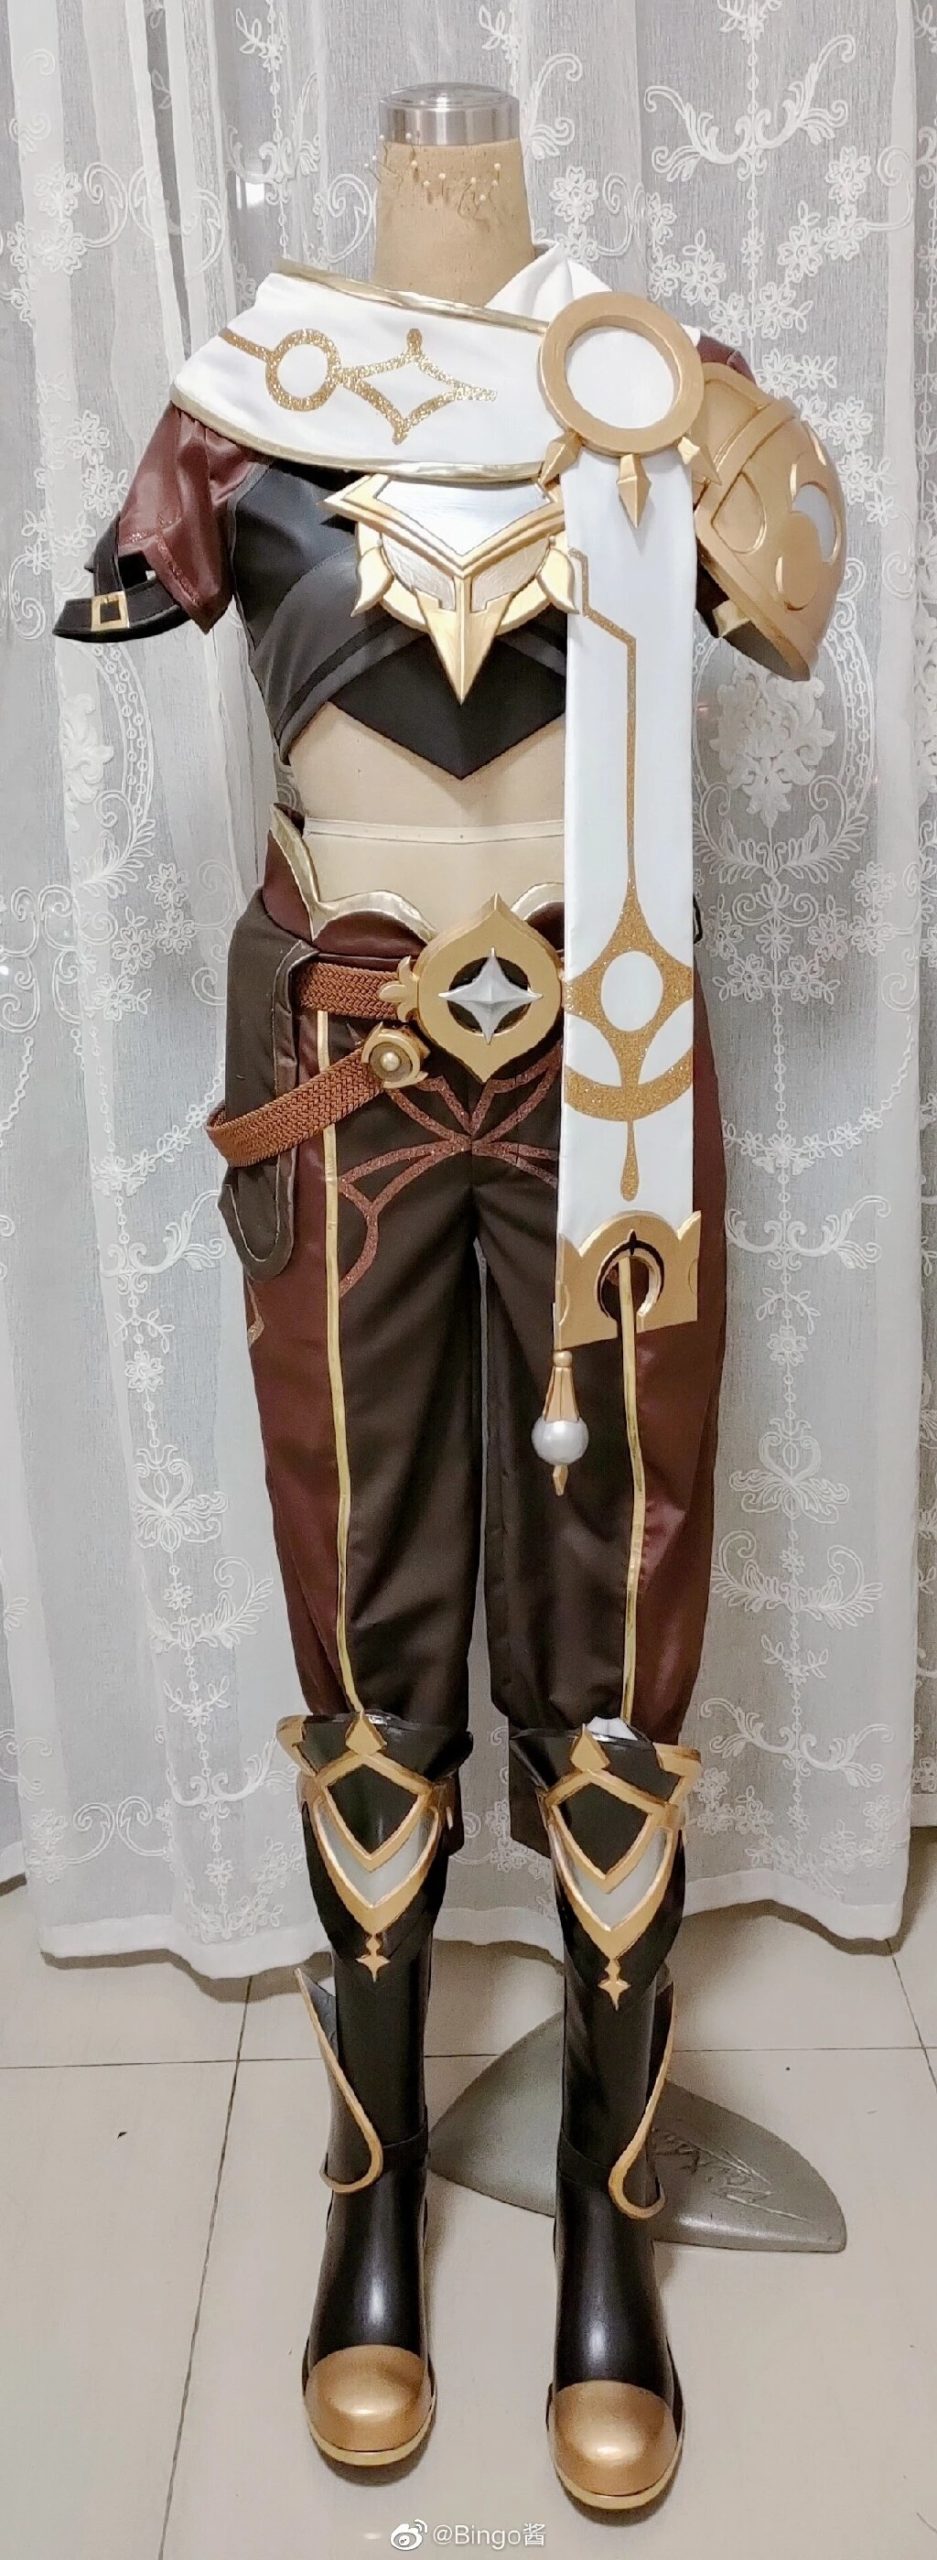 Custom Made/Size Traveler Aether Cosplays Genshin Impact Aether Cosplay Costume 2 orders